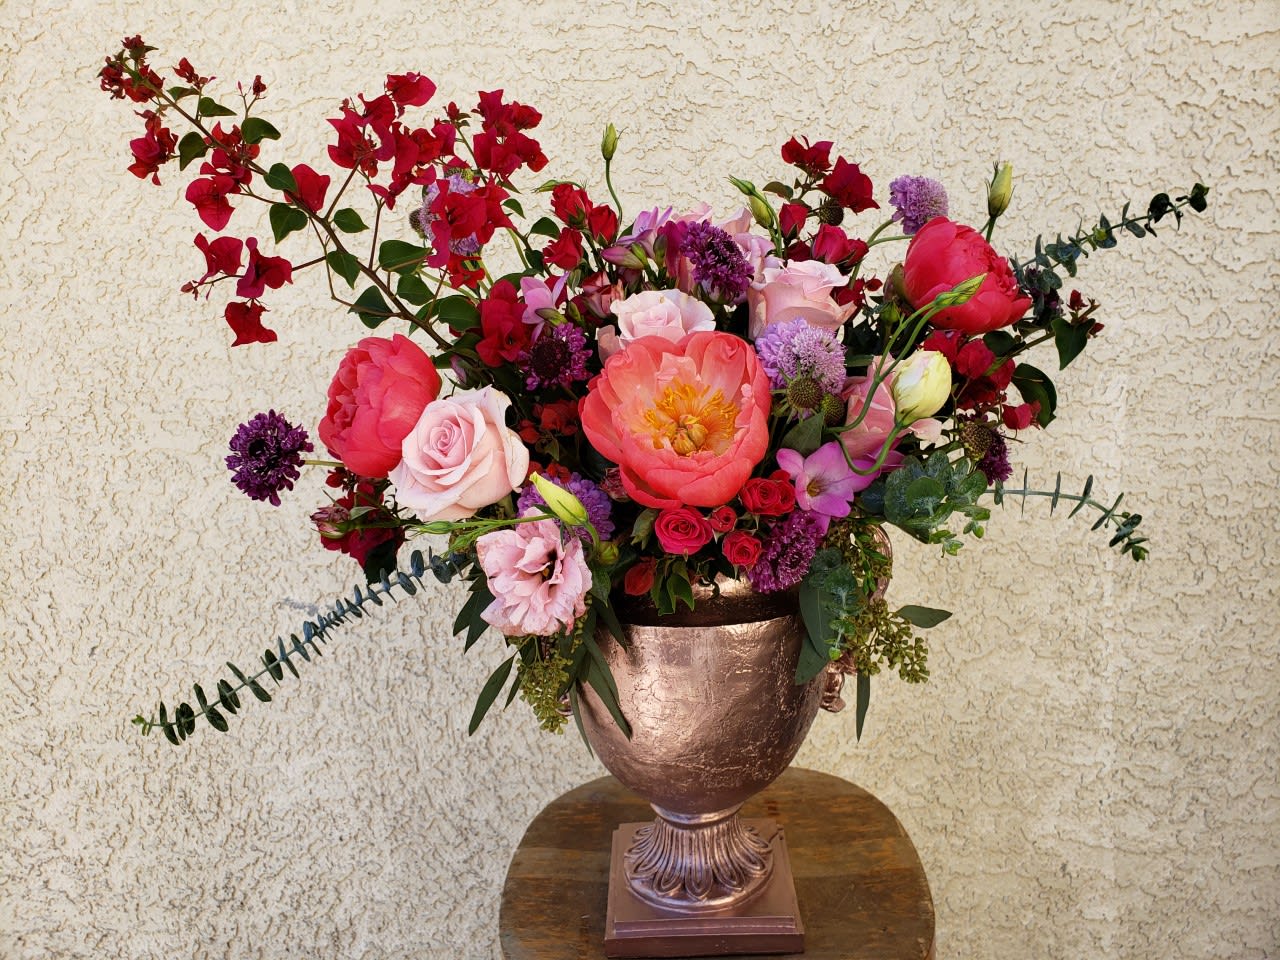 KA-Bloom - Your gift of opulence will surely be on floral display with an abundance of Peonies, Roses, Freesia, and seasonal greens. This arrangement will certainly make 'em say &quot;KA-Bloom!&quot;